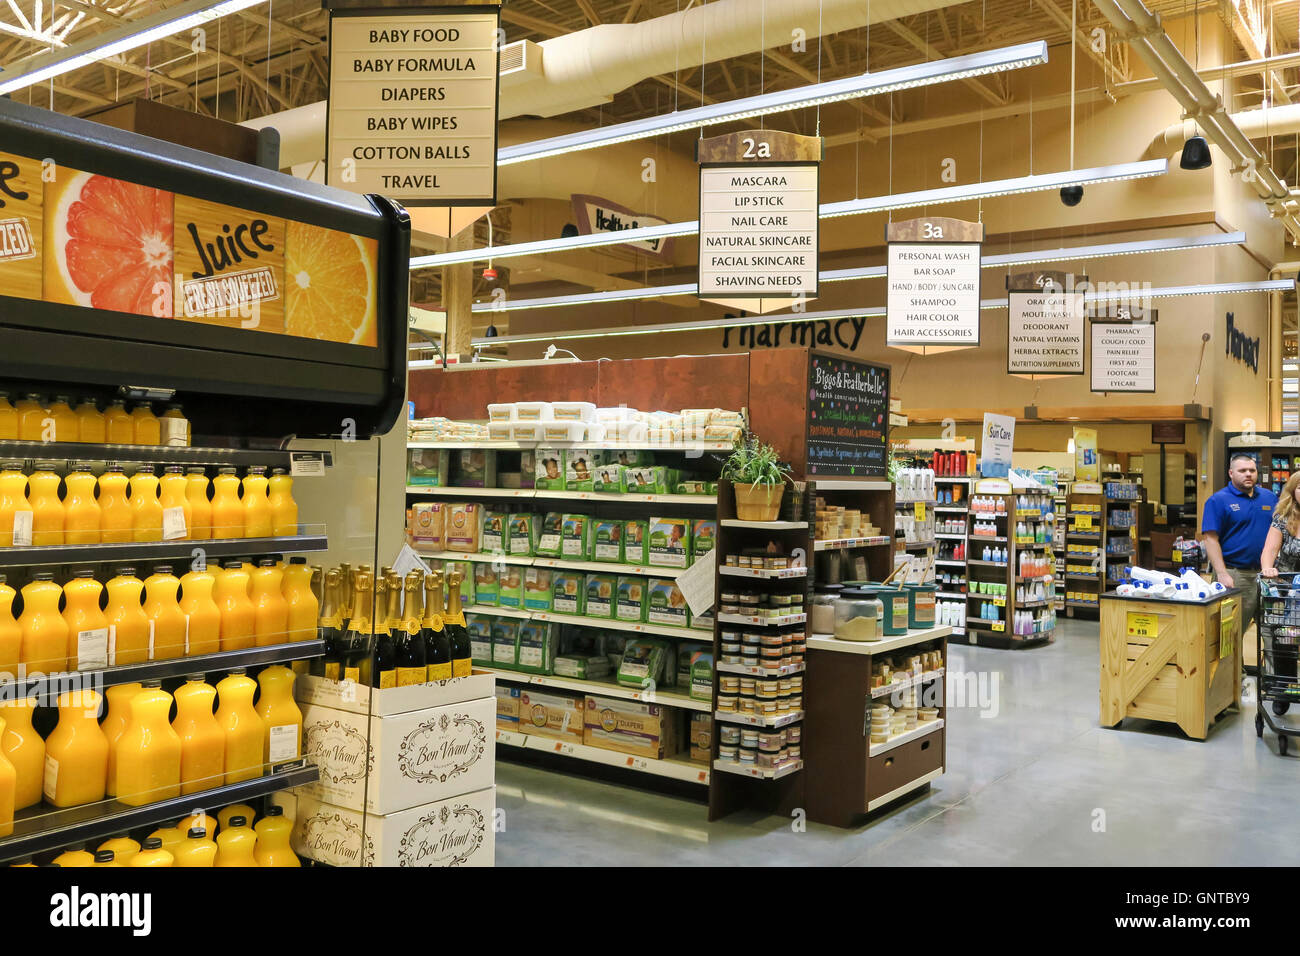 End Aisle Displays at Wegmans Grocery Store, Westwood, Massachusetts, USA Stock Photo